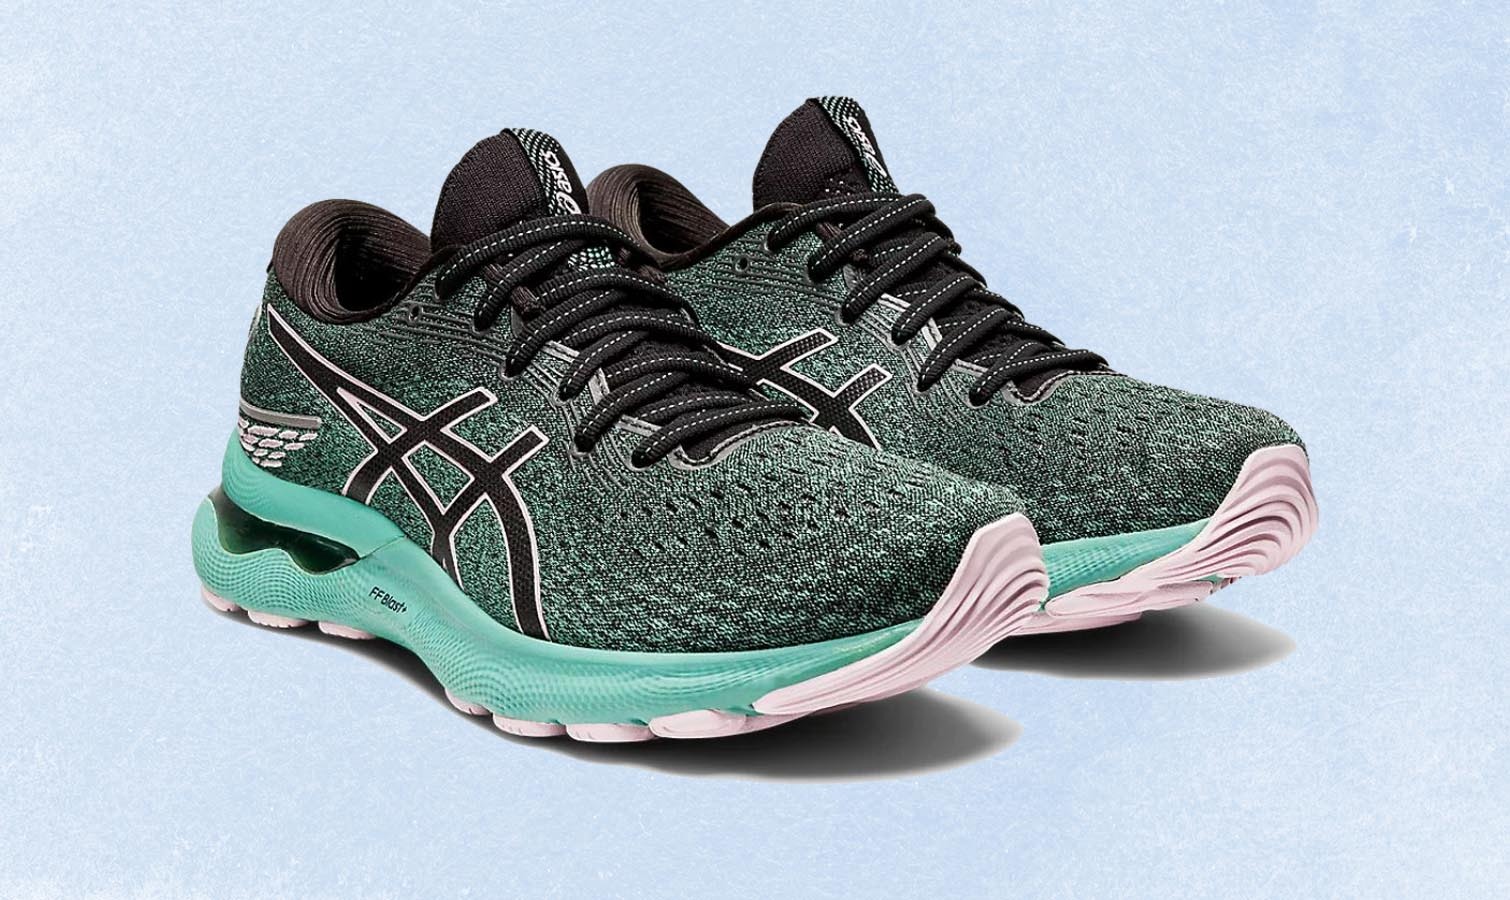 Running in cold weather? Save over $70 on the popular Asics Gel-Nimbus ...